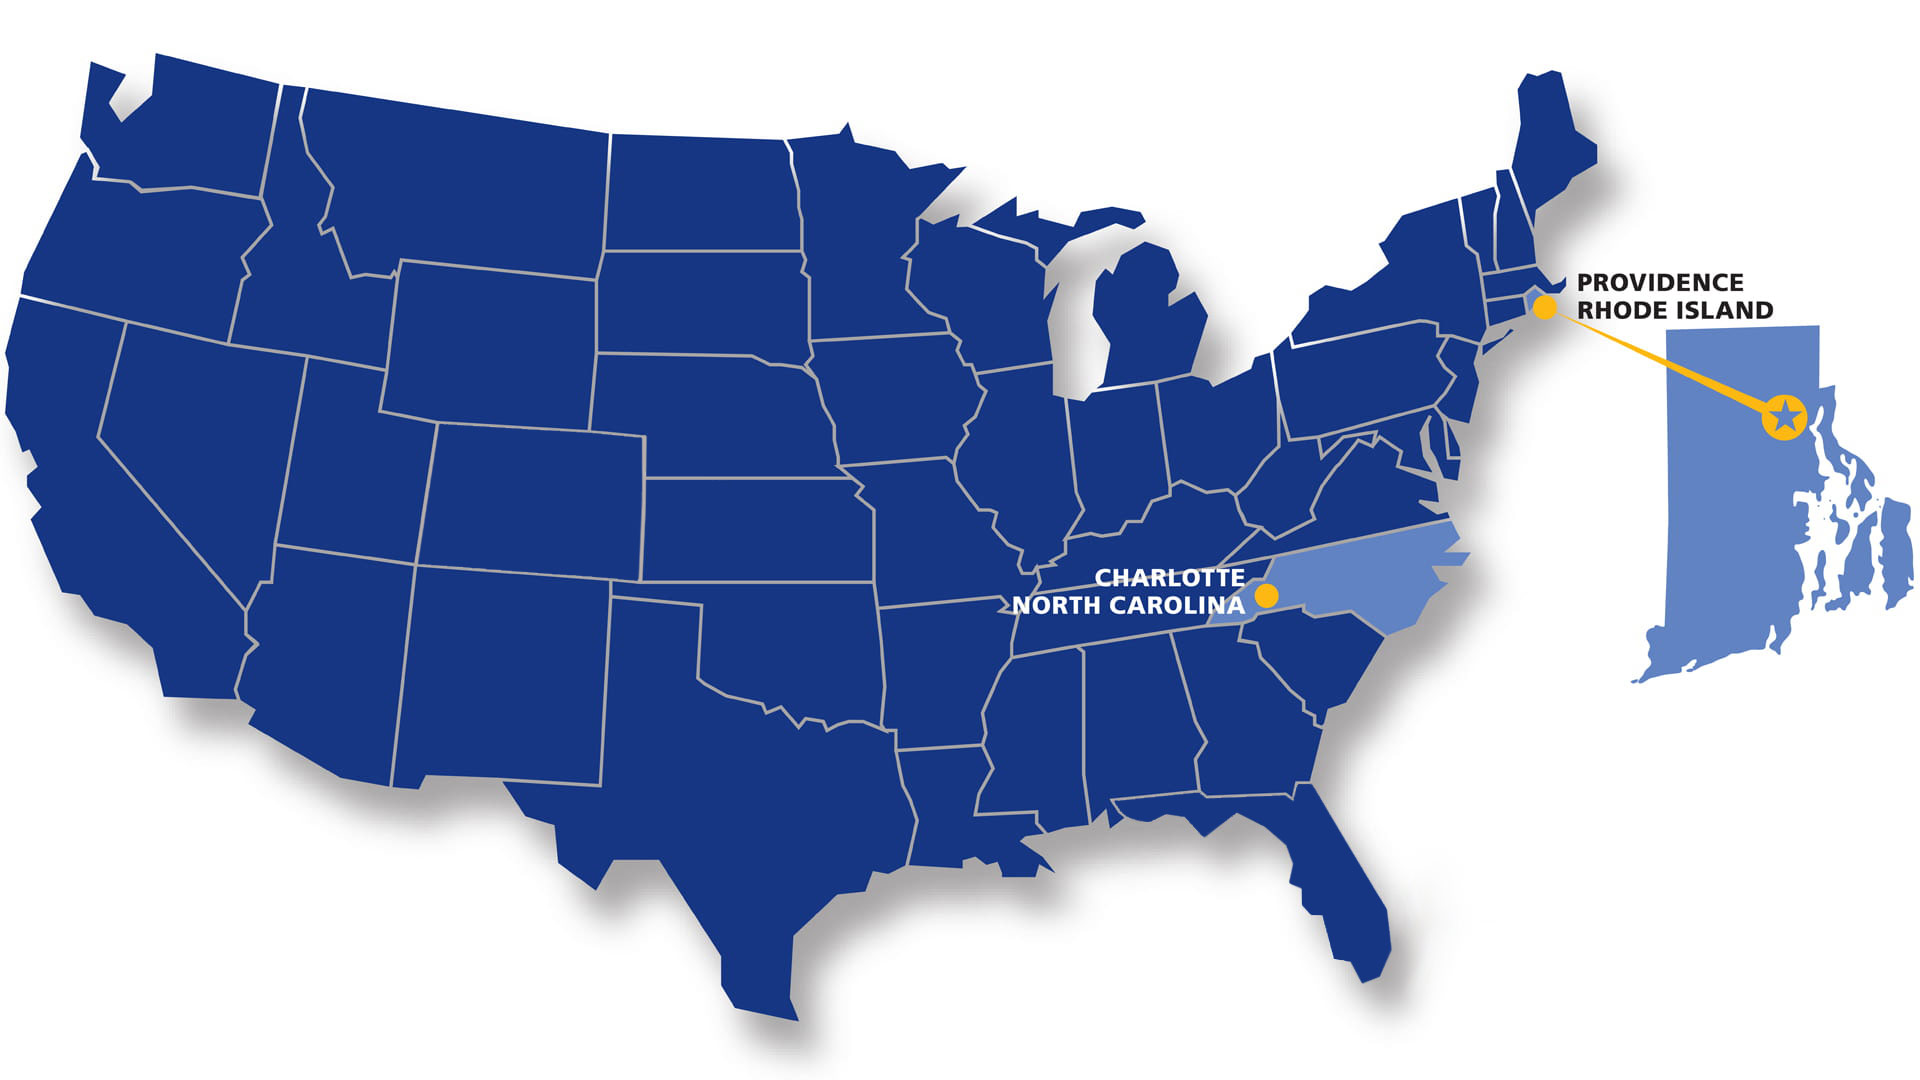 Map of the United States with JWU's two campus locations, Providence, Rhode Island, and Charlotte, North Carolina, highlighted.